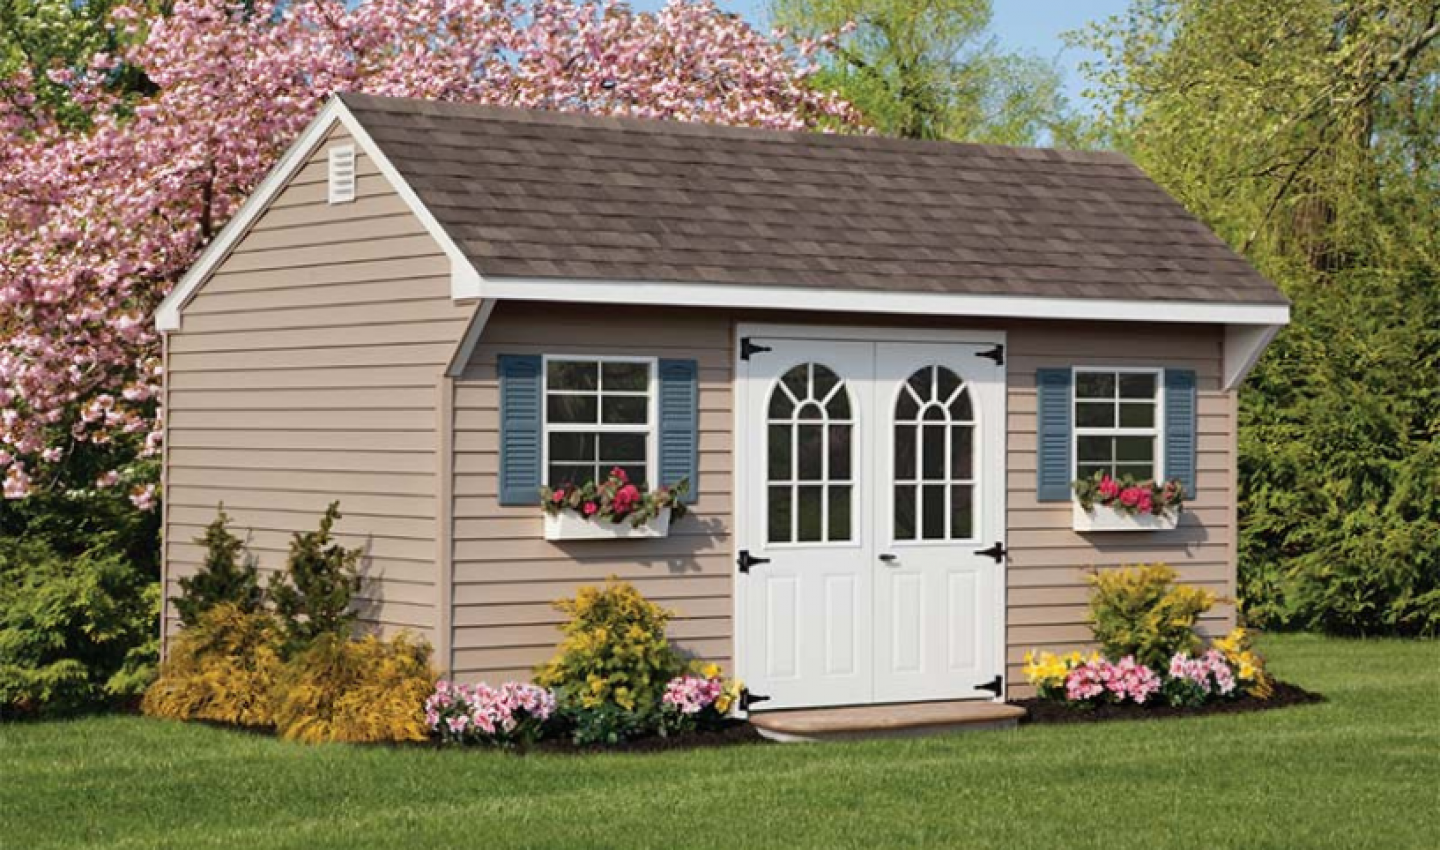 Sheds for Sale in Middlesex County